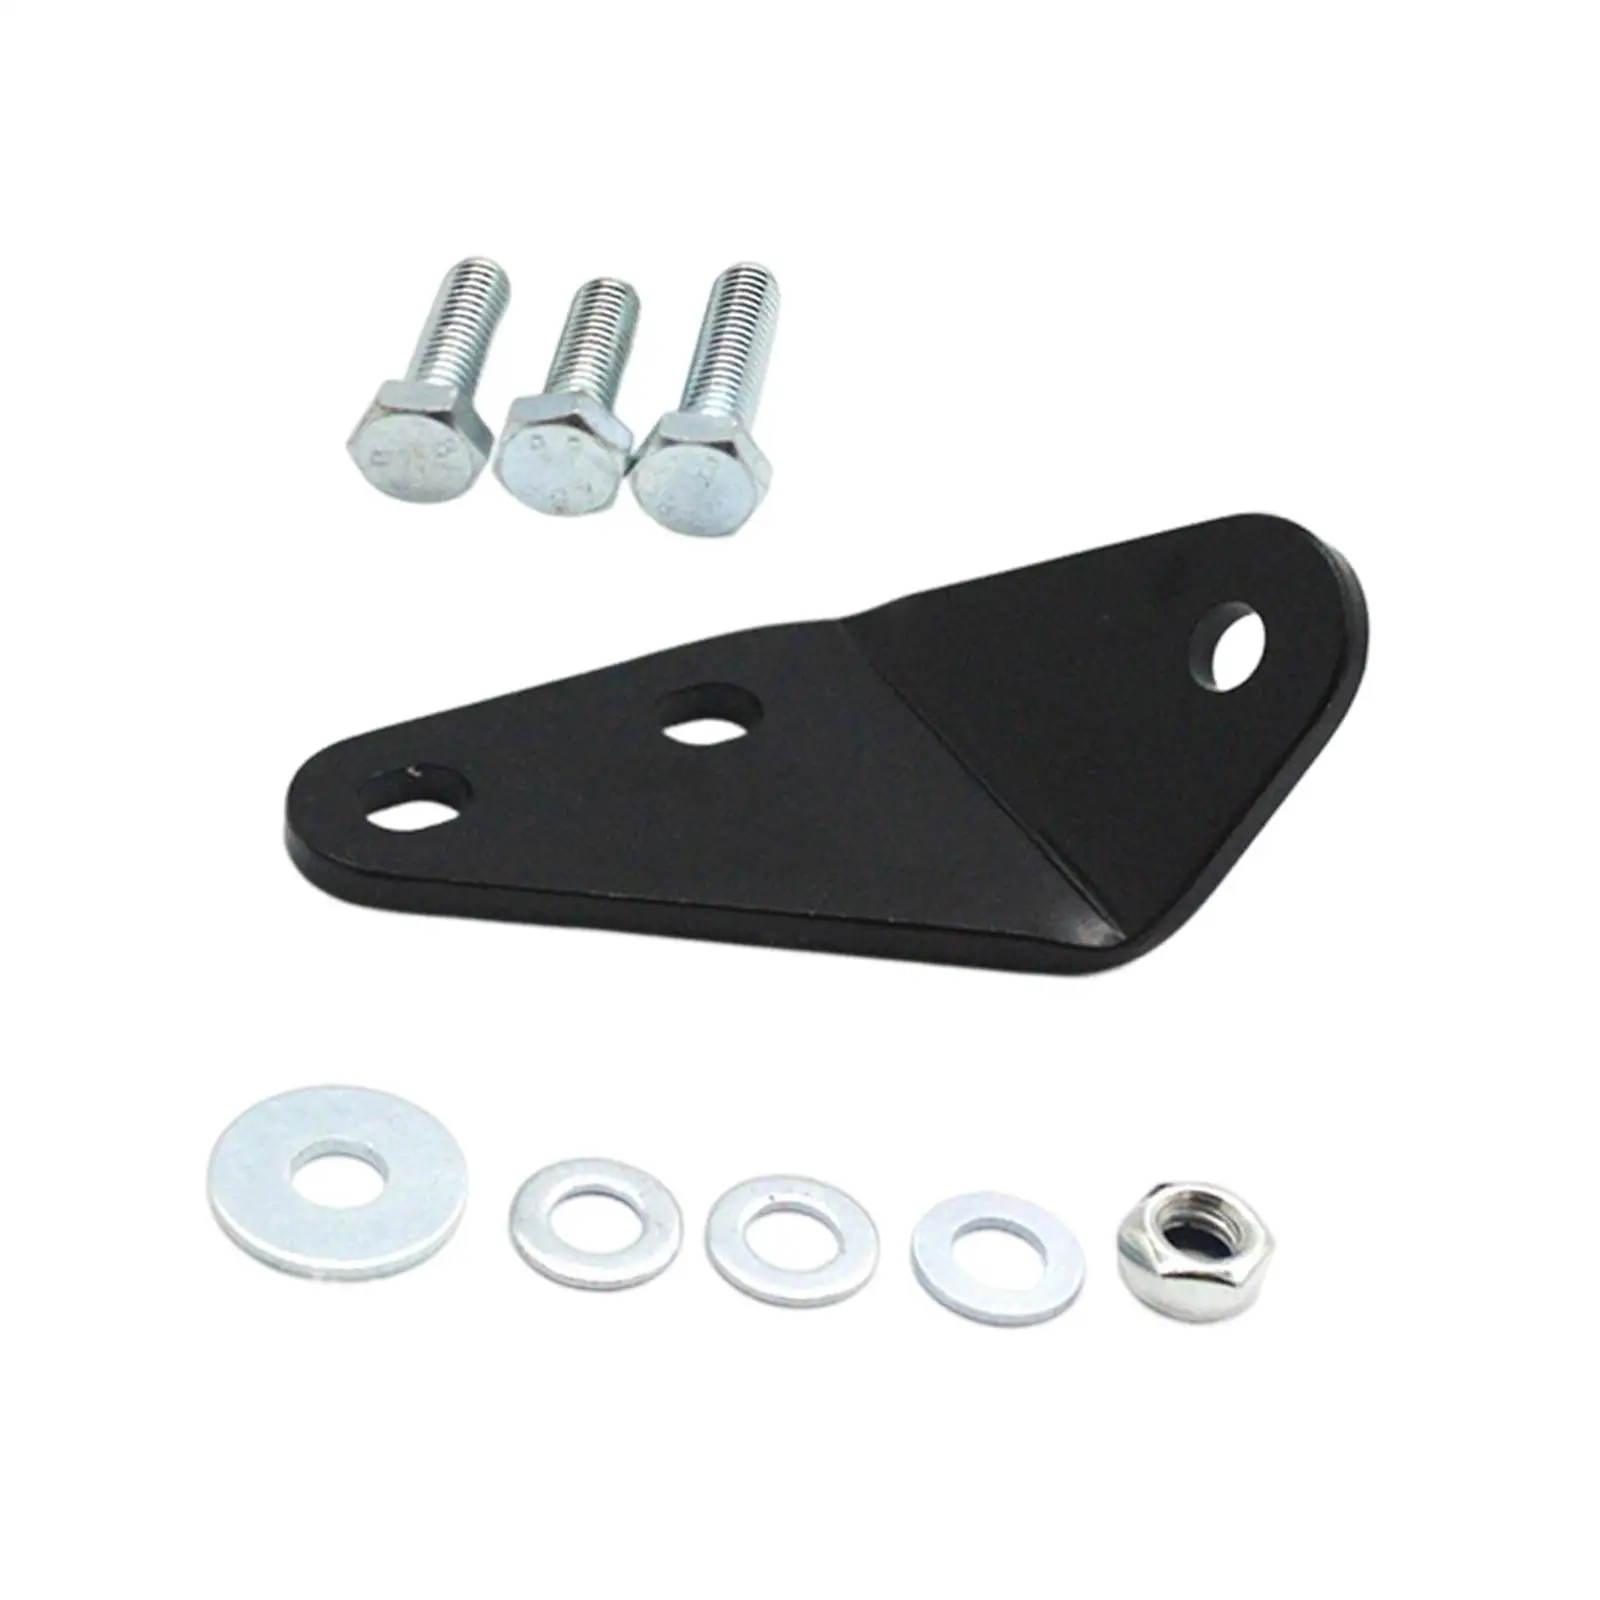 Clutch Pedal Bracket High Performance High Quality for Volkswagen T4 Transporter Caravelle Multivan Automotive Accessories